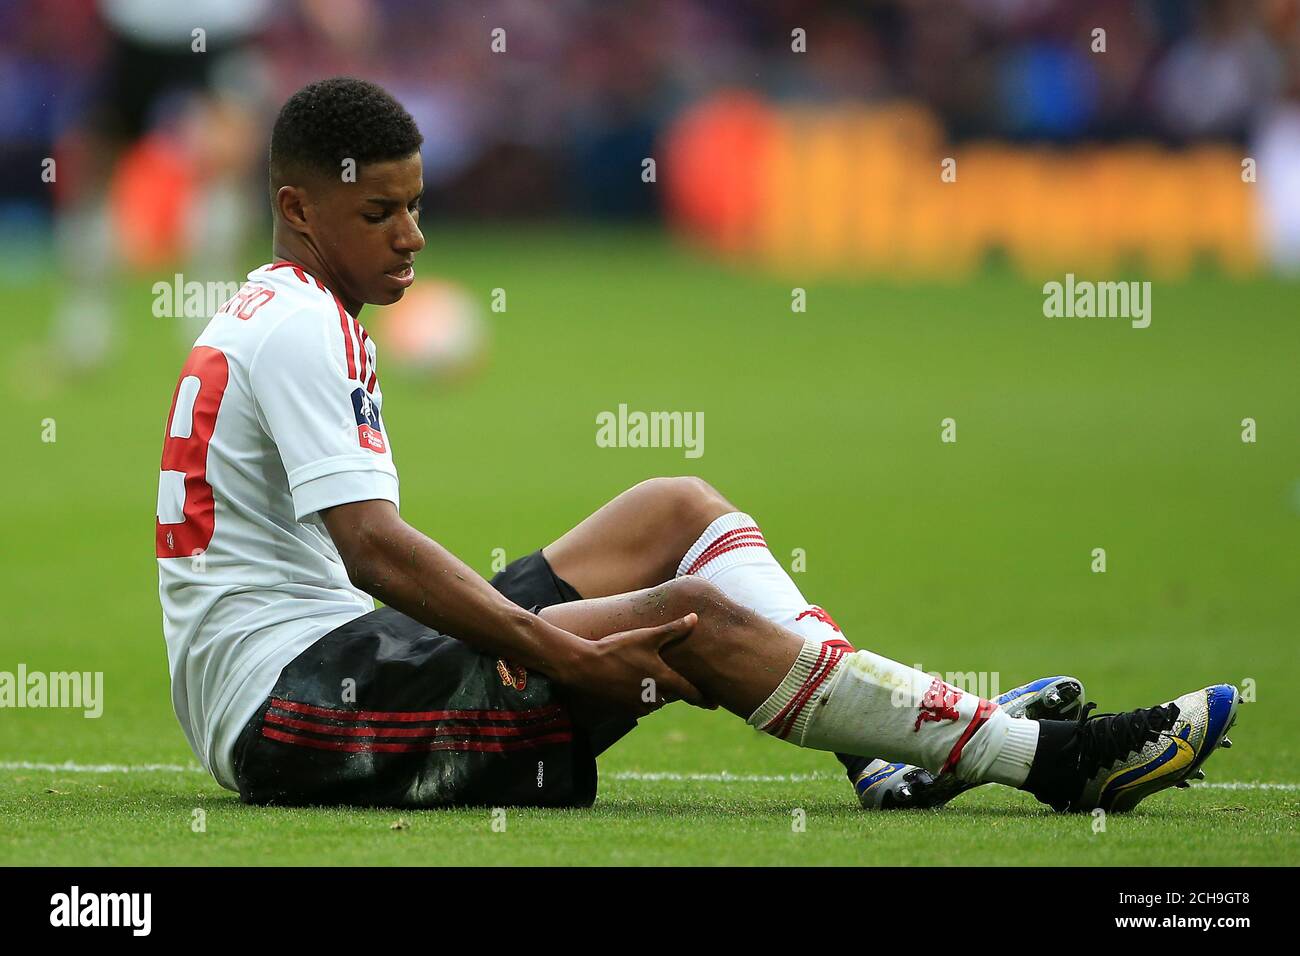 Manchester Uniteds Marcus Rashford holds his knee after taking a knock during the Emirates FA Cup Final at Wembley Stadium. PRESS ASSOCIATION Photo